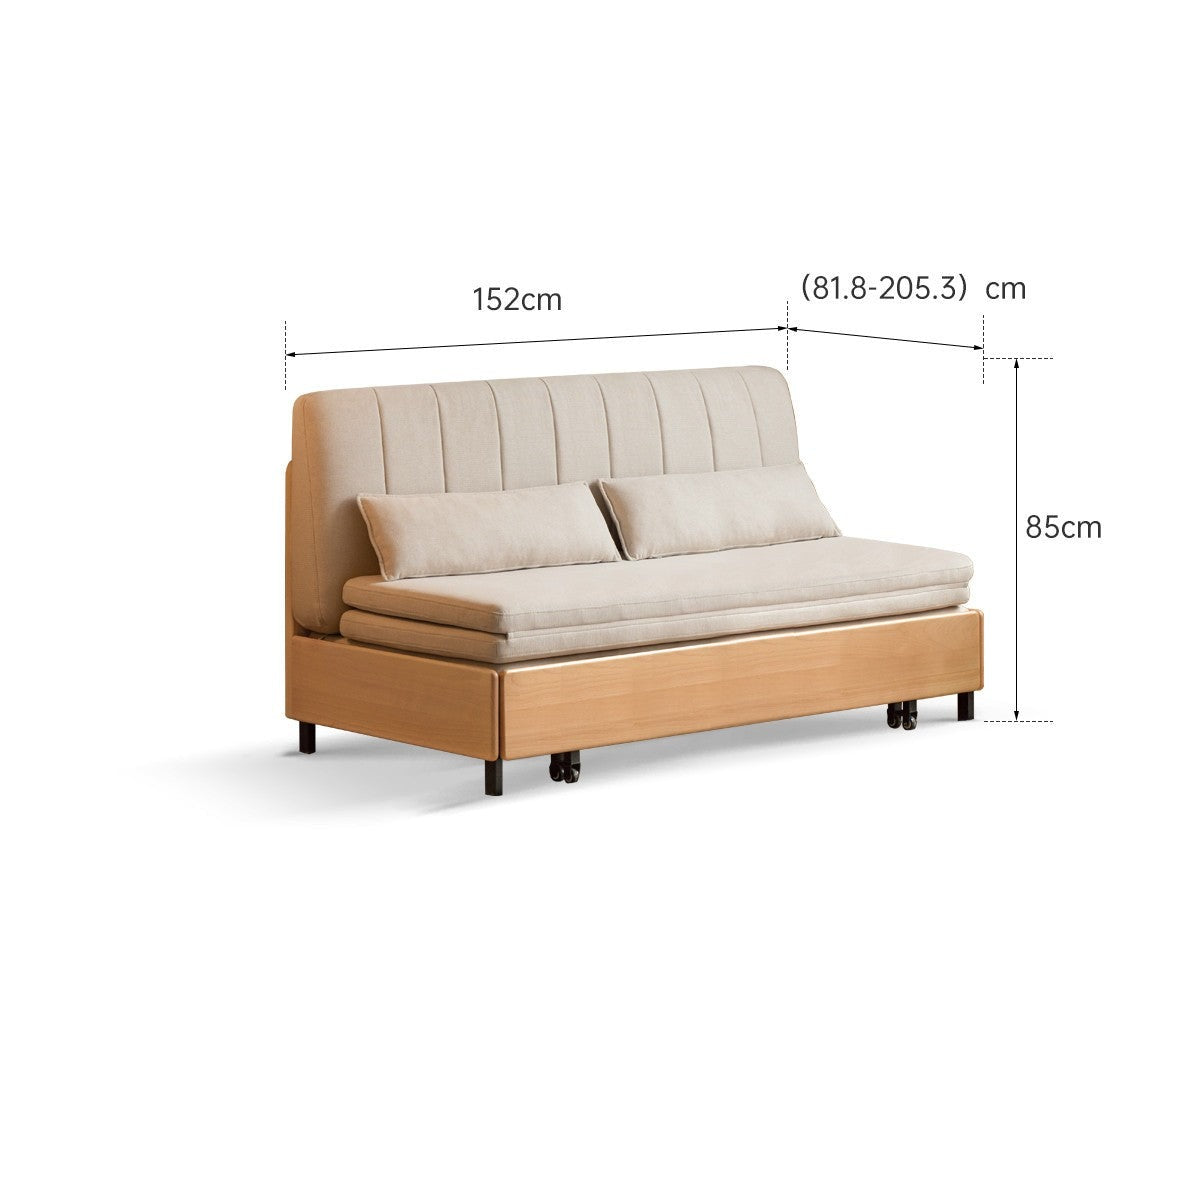 Beech solid wood retractable fabric sofa bed+